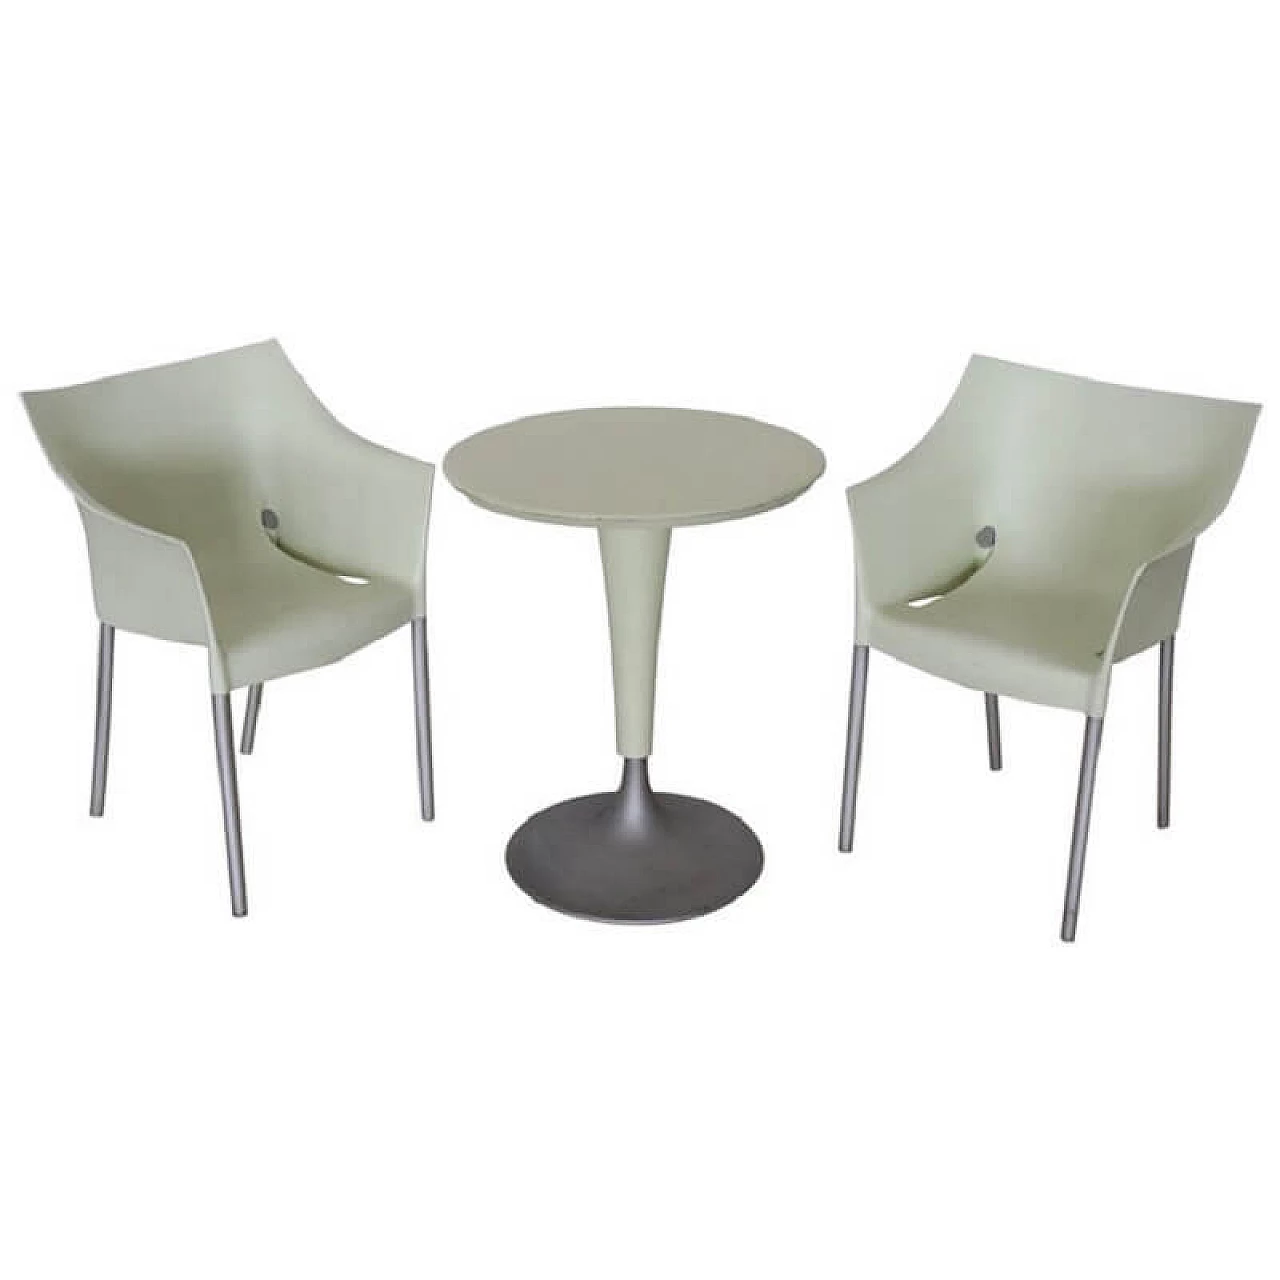 Table and two chairs designed by Philippe Starck for Kartell, '90s 1072750